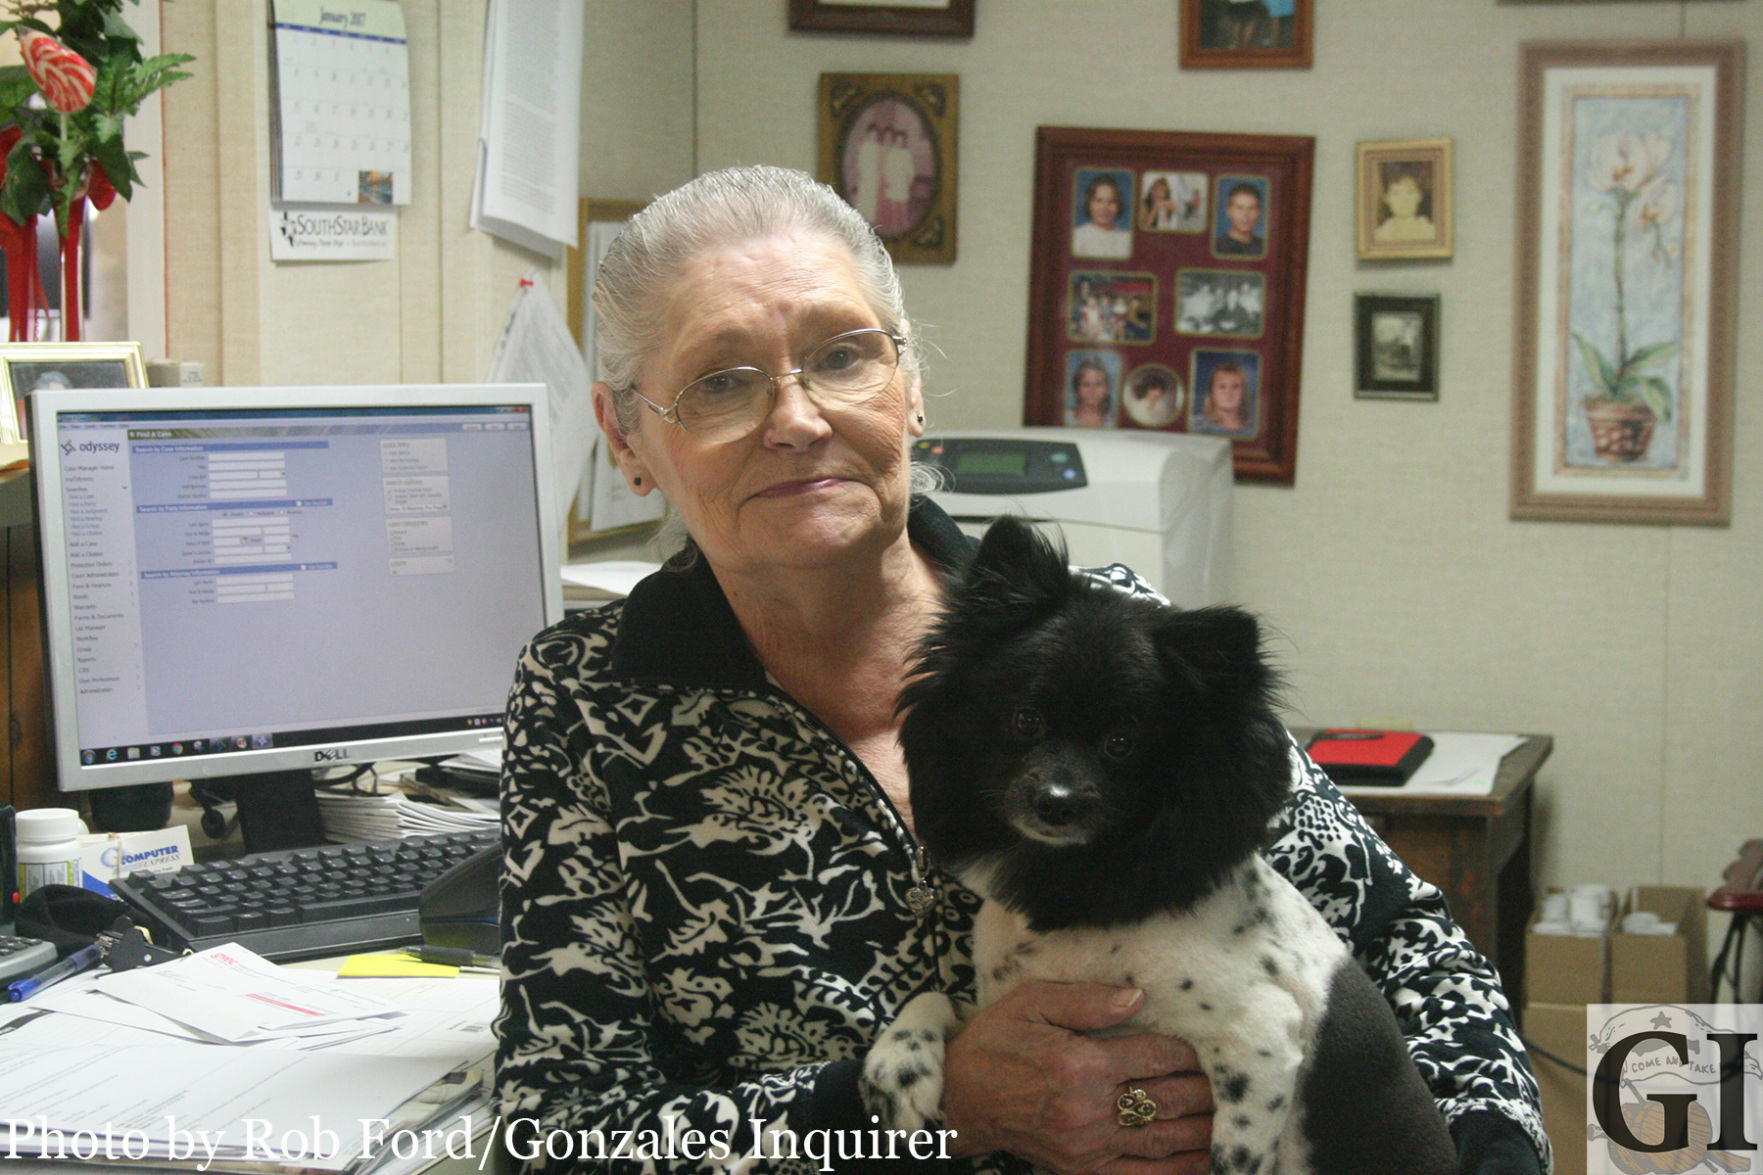 County Clerk Lee Riedel with her dog Pee-Wee at the county annex building. Riedel is retiring after nearly 20 years working for Gonzales County.